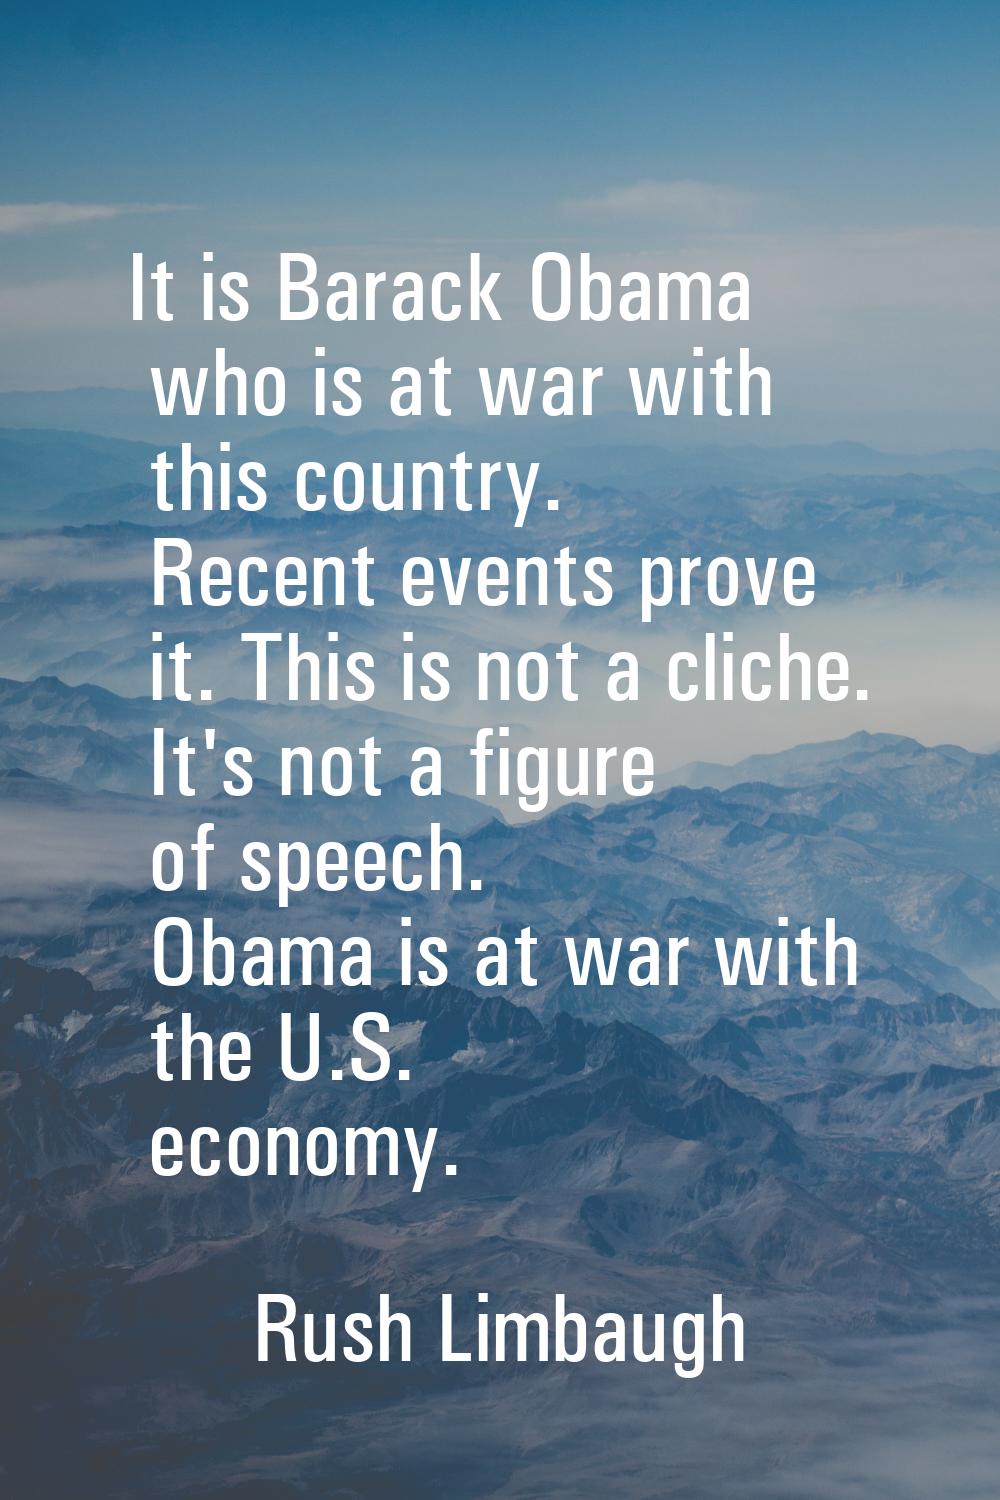 It is Barack Obama who is at war with this country. Recent events prove it. This is not a cliche. I